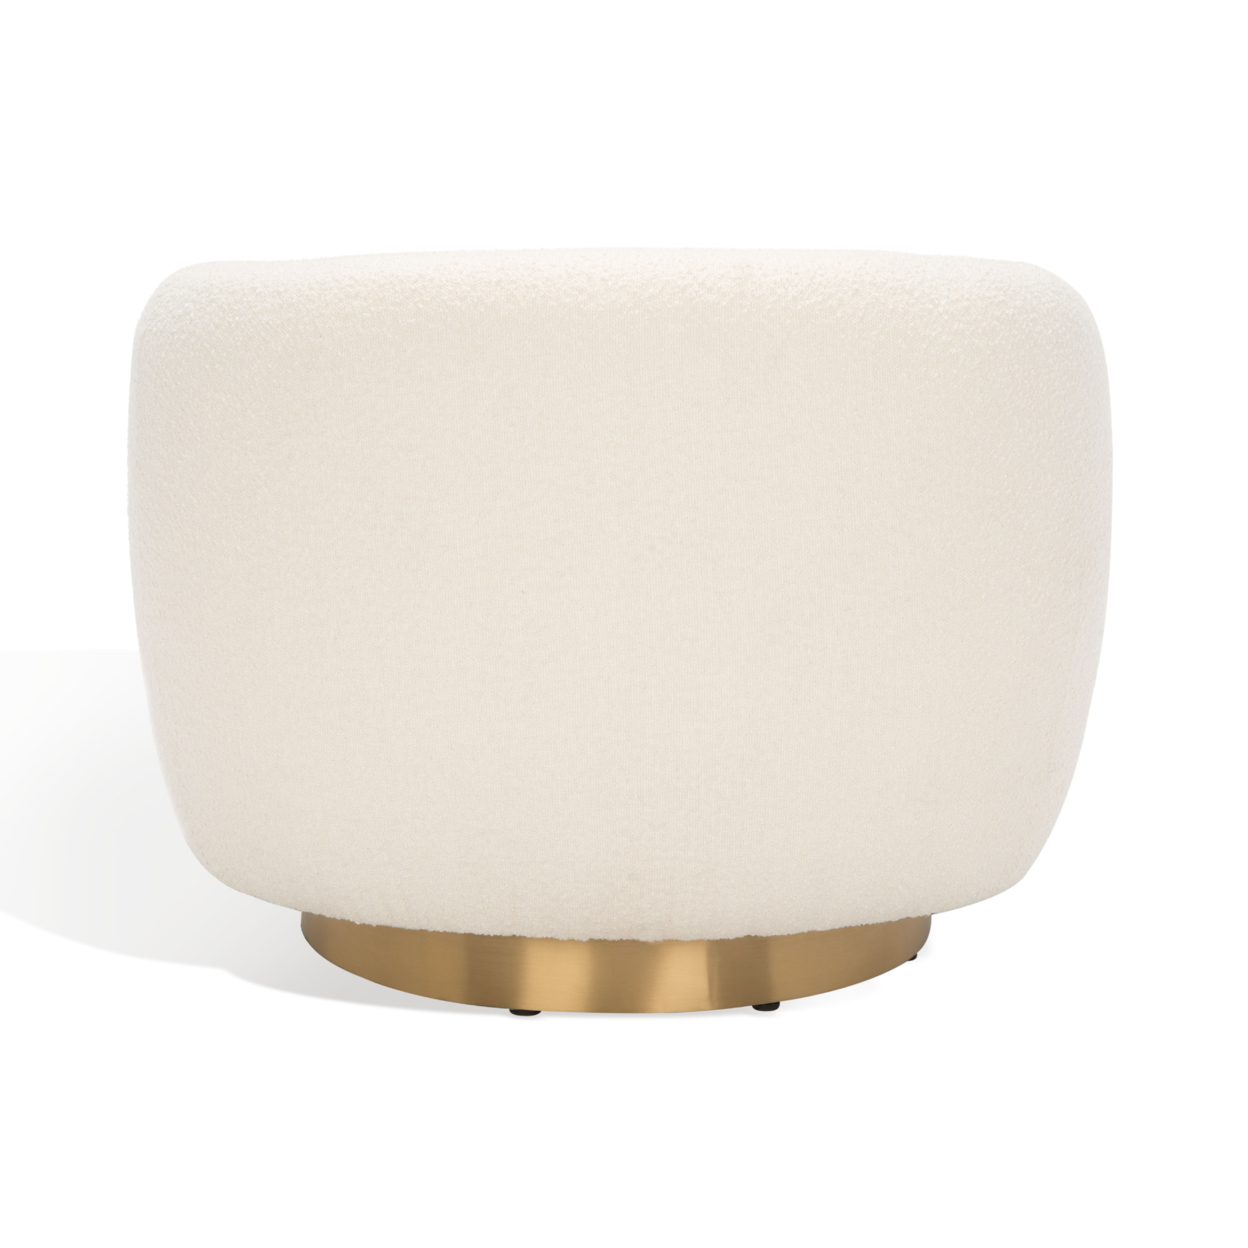 SAFAVIEH COUTURE Bernard Swivel Accent Chair Ivory / Gold